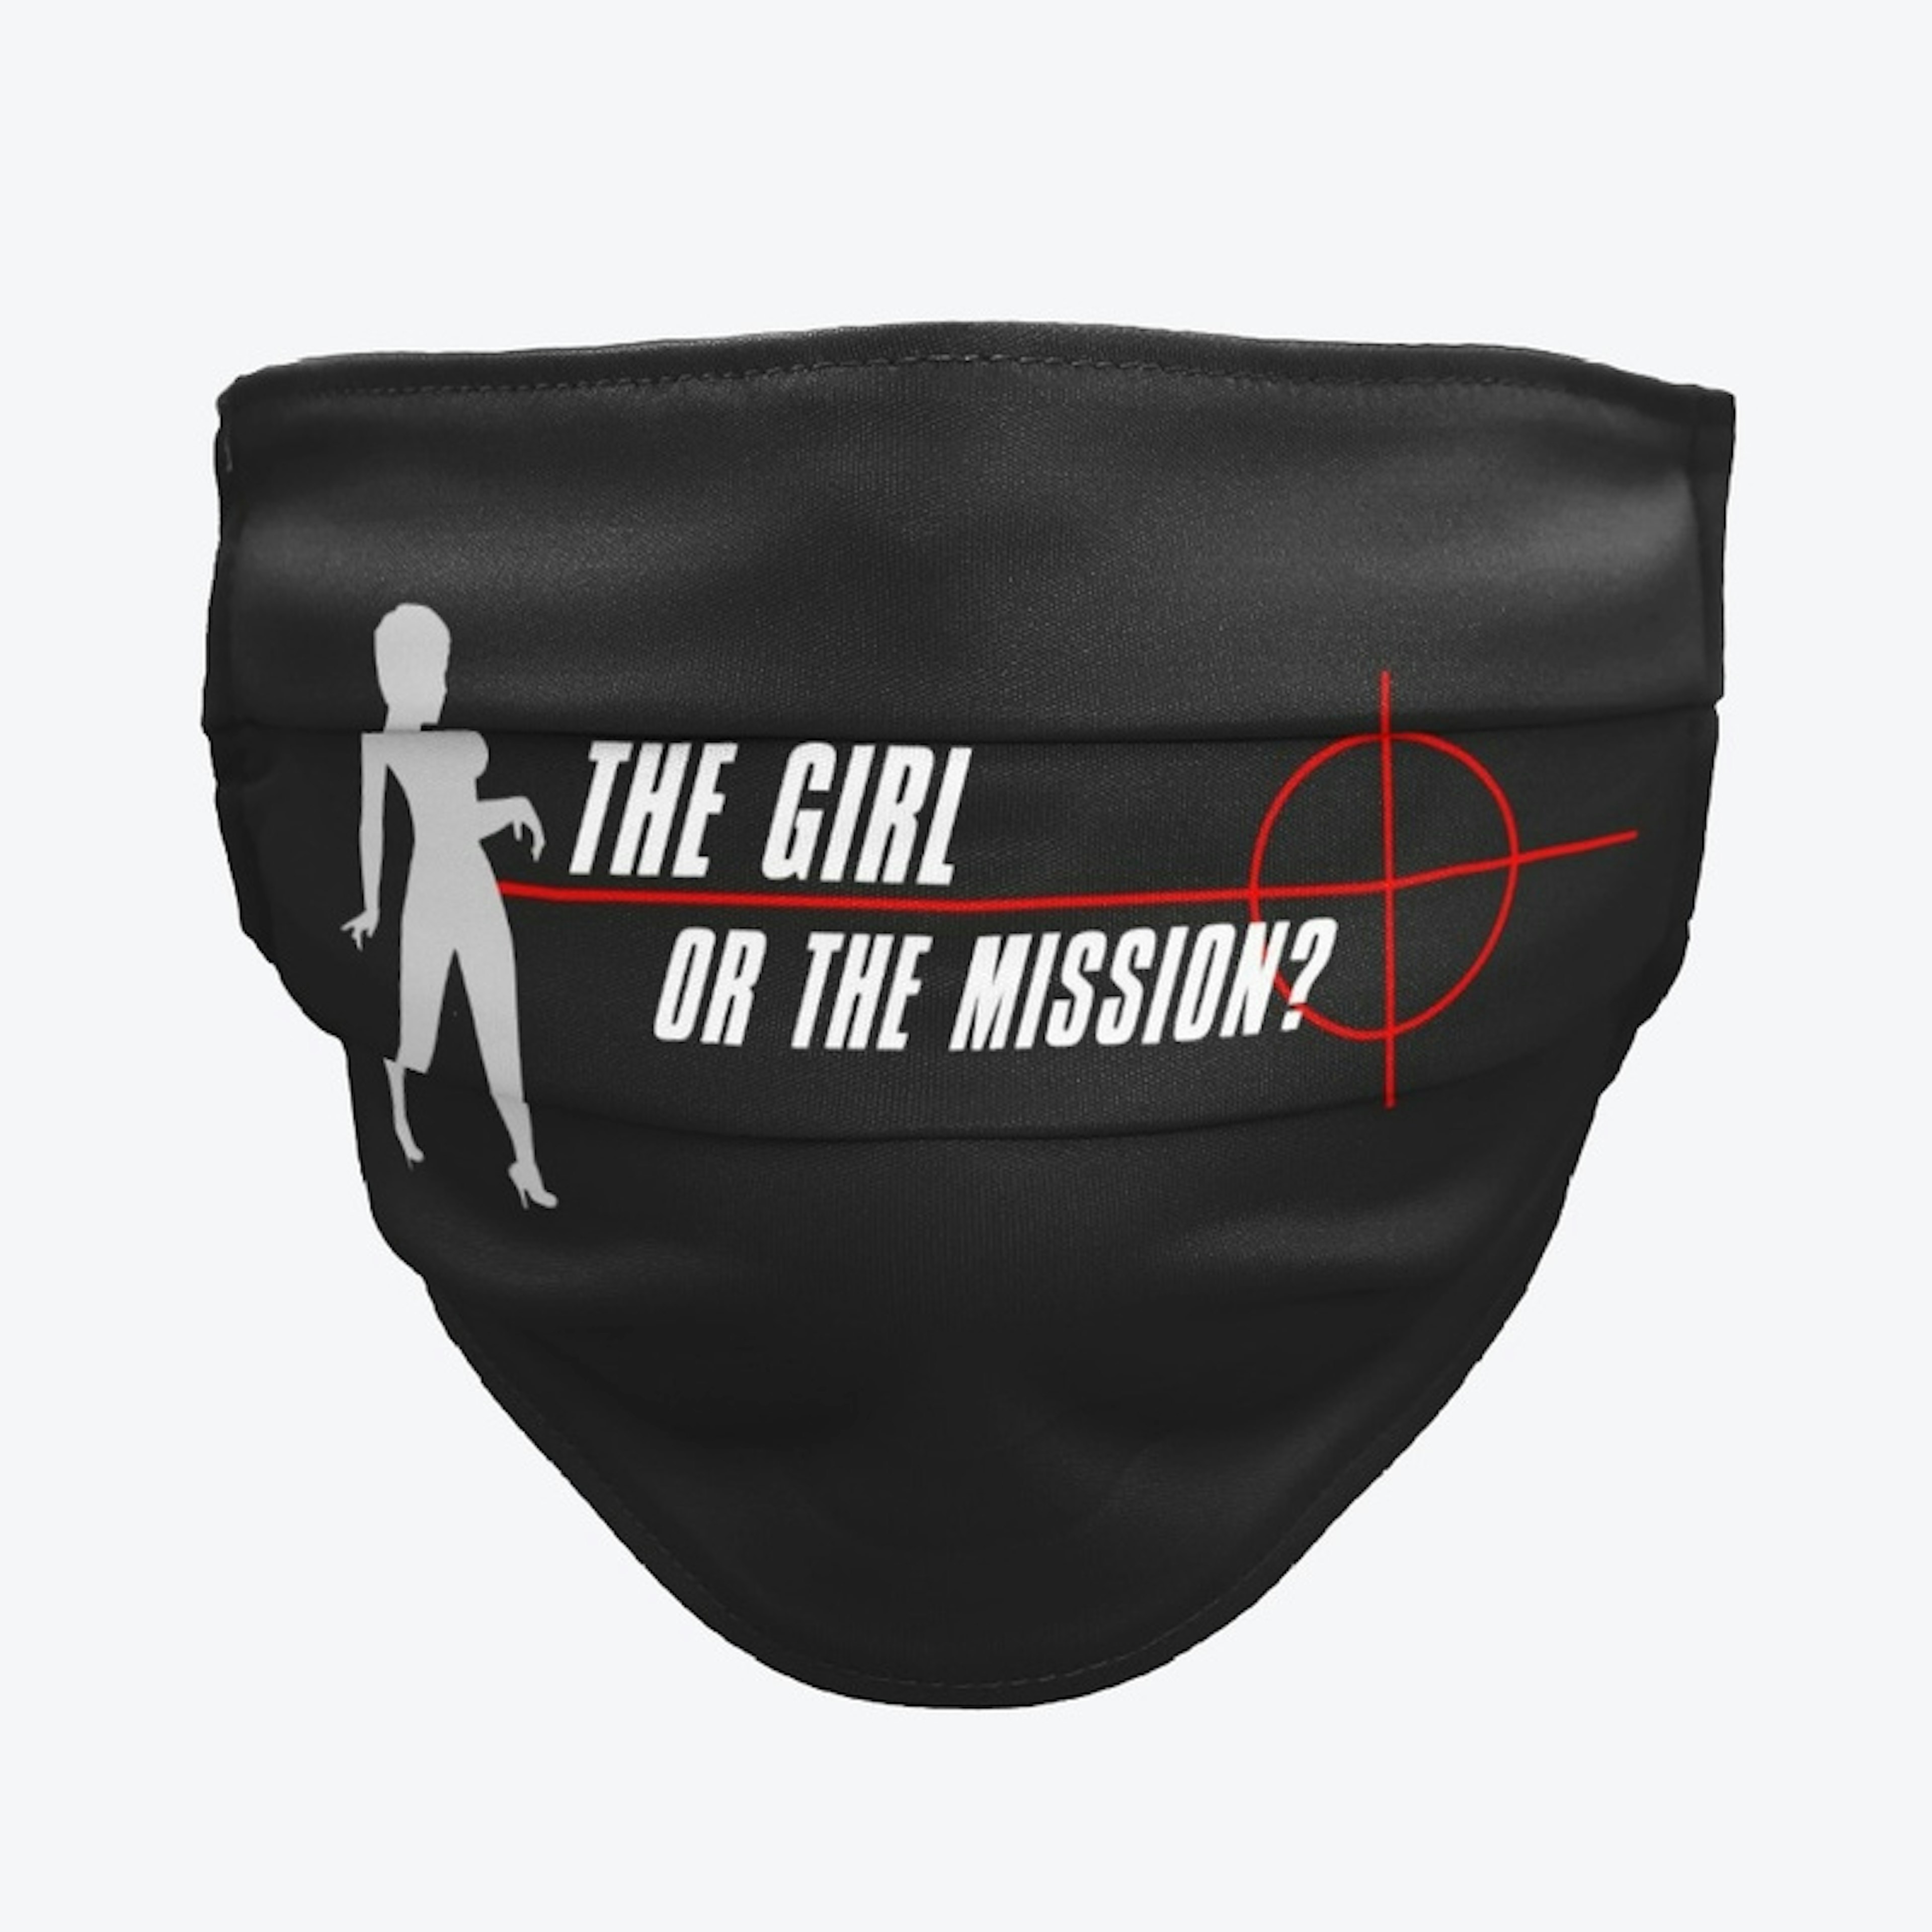 The Girl or The Mission?